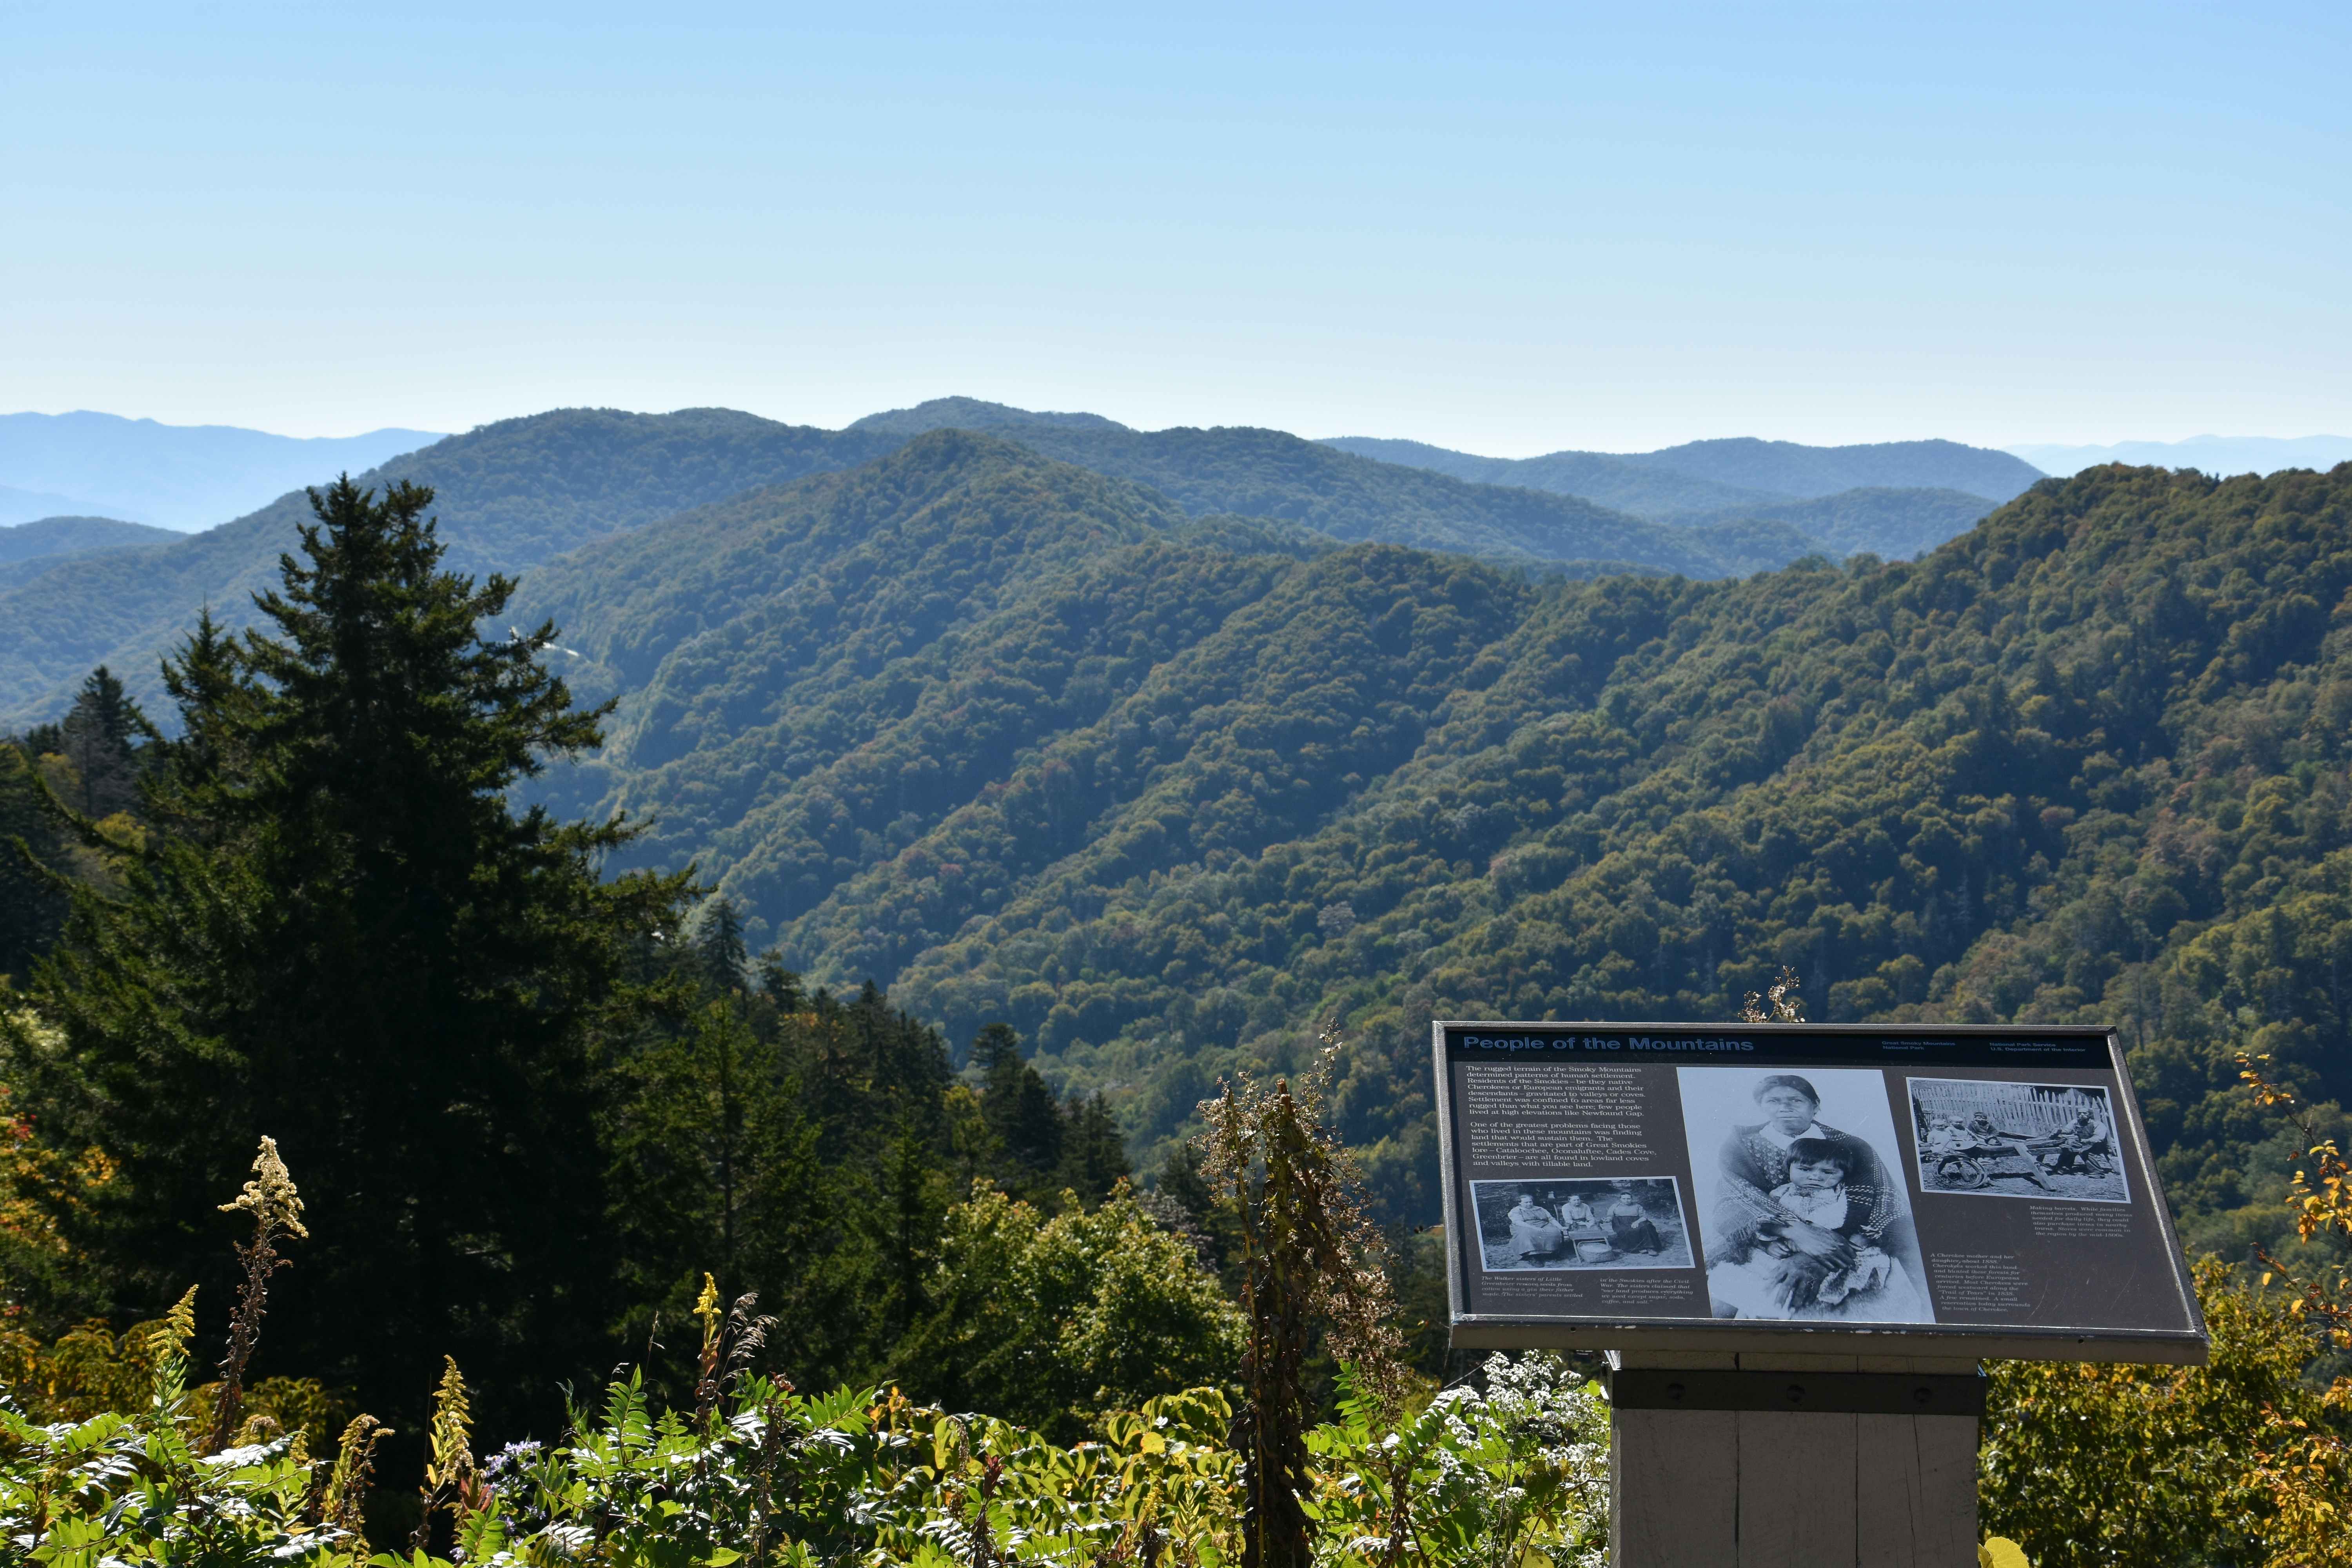 A scenic mountain view of the Great Smoky Mountains National Park in Tennessee